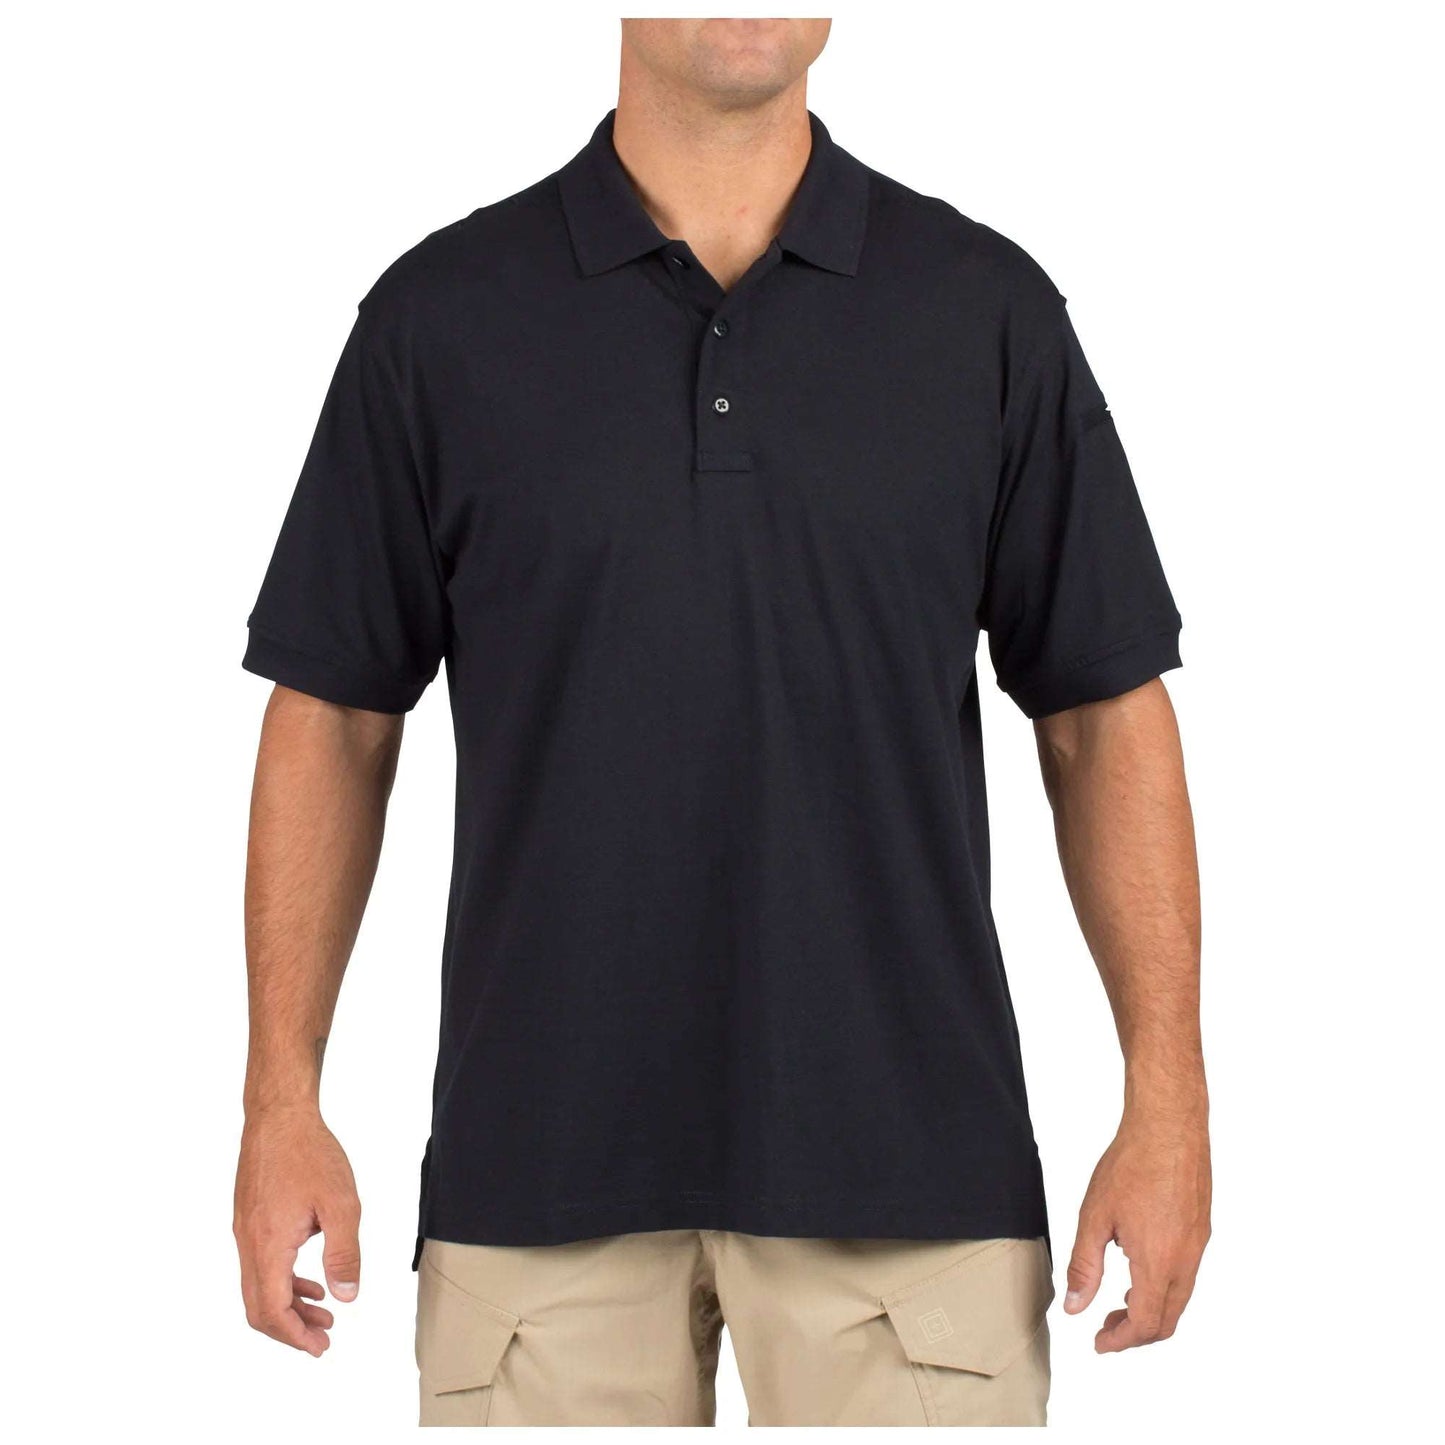 5.11 Tactical Jersey Short Sleeve Polo-Tac Essentials